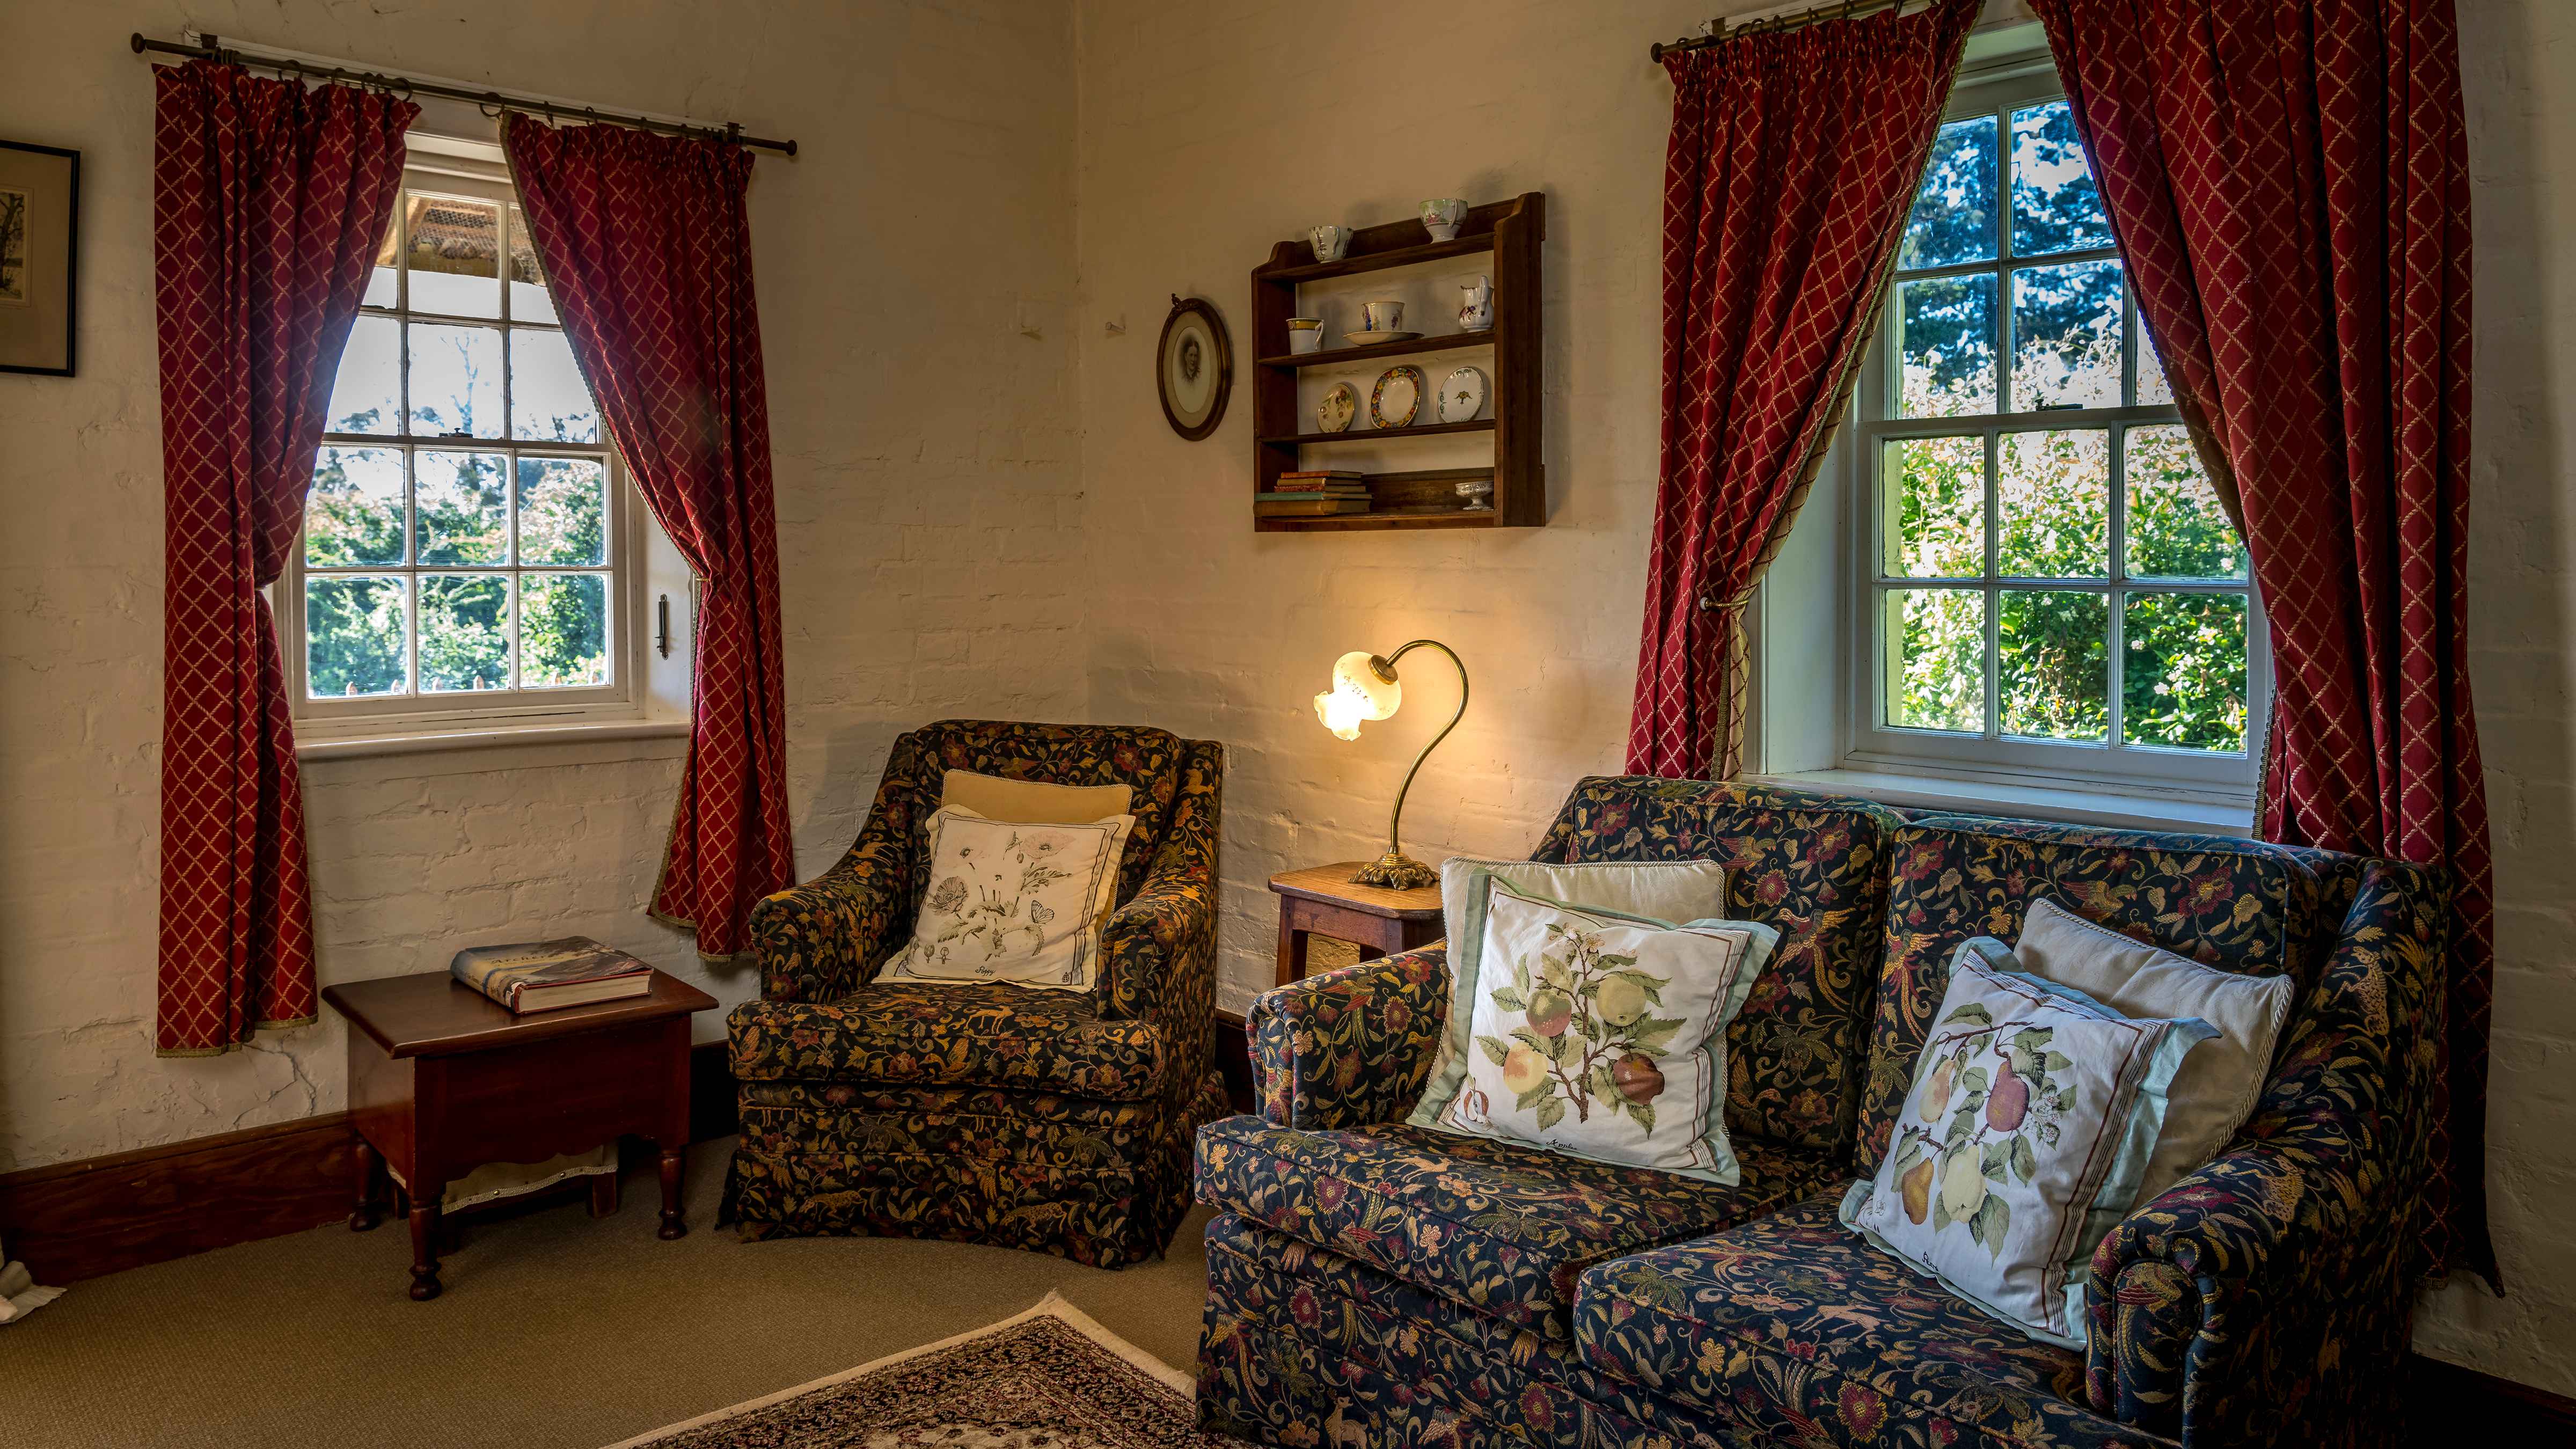 This room is decorated in the cottage style with a small dark pattern fabric covered couch and single chair. Cushions with pear tree motifs are on the couch and chair. A lamp which is turned on is lighting the wall which has a small set of timber shelves decorated with old fashioned cups and saucers and a couple of little books. Two Georgian paned windows have red curtains pulled to each side. Green foliage can be seen through the windows. A timber box with a large book stands beside the chair and under the window. Photo: Rob Burnett.